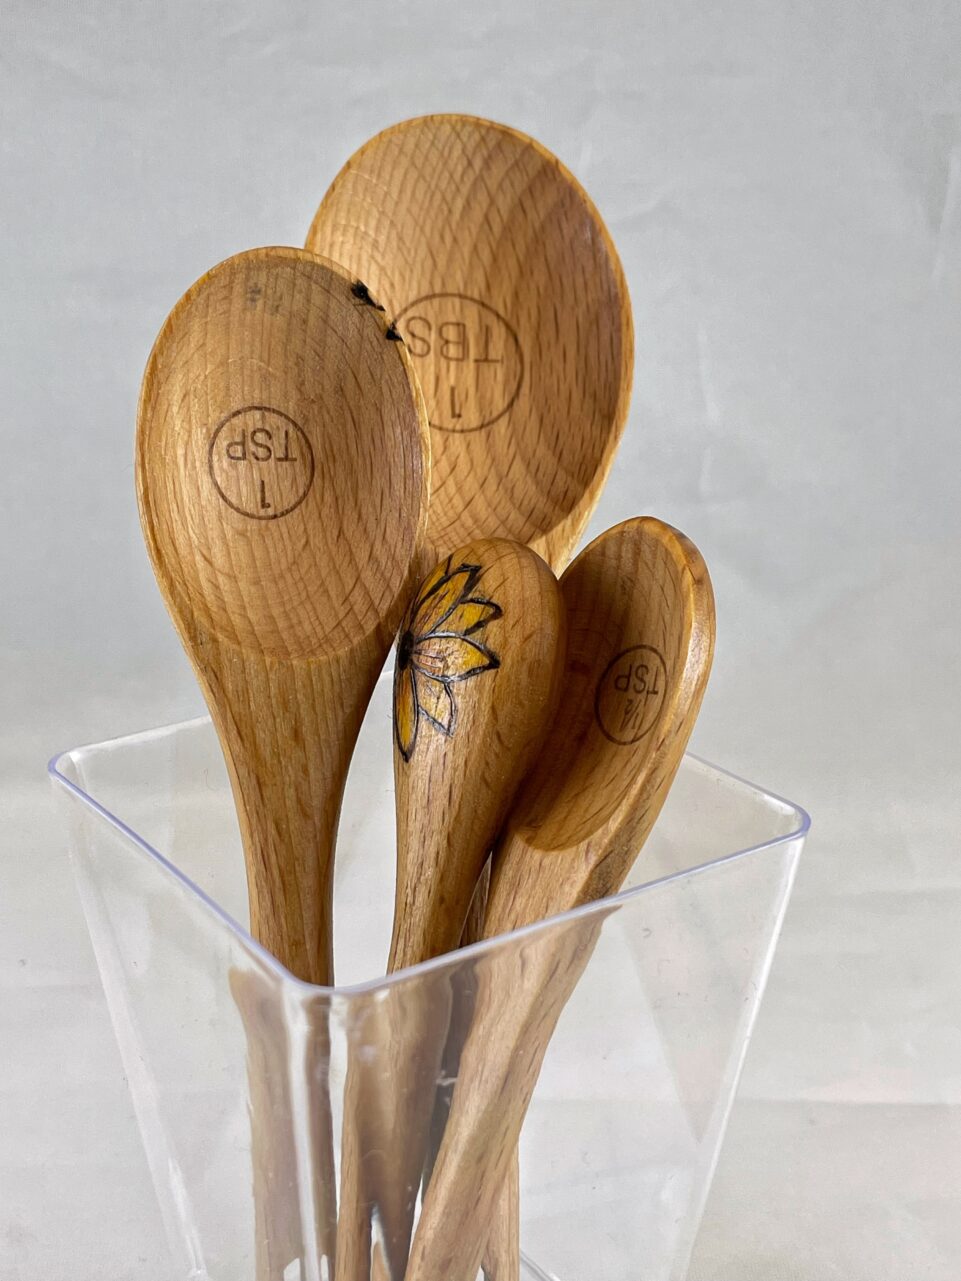 Small Wooden Spoons, Set of 3 – Some September